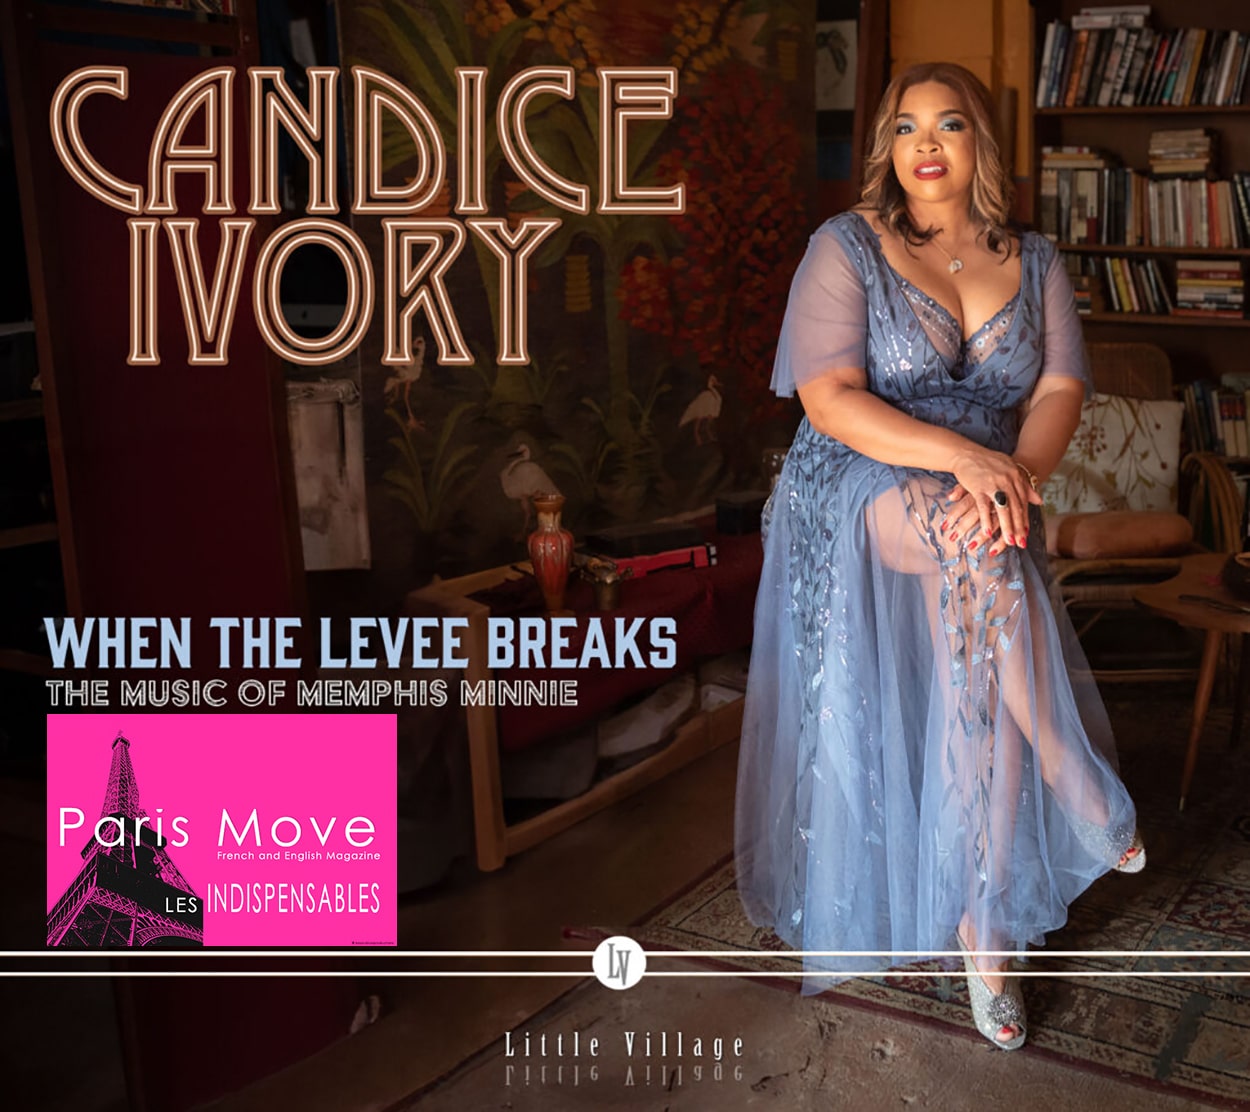 Candice Ivory - When The Levee Breaks – The Music Of Memphis